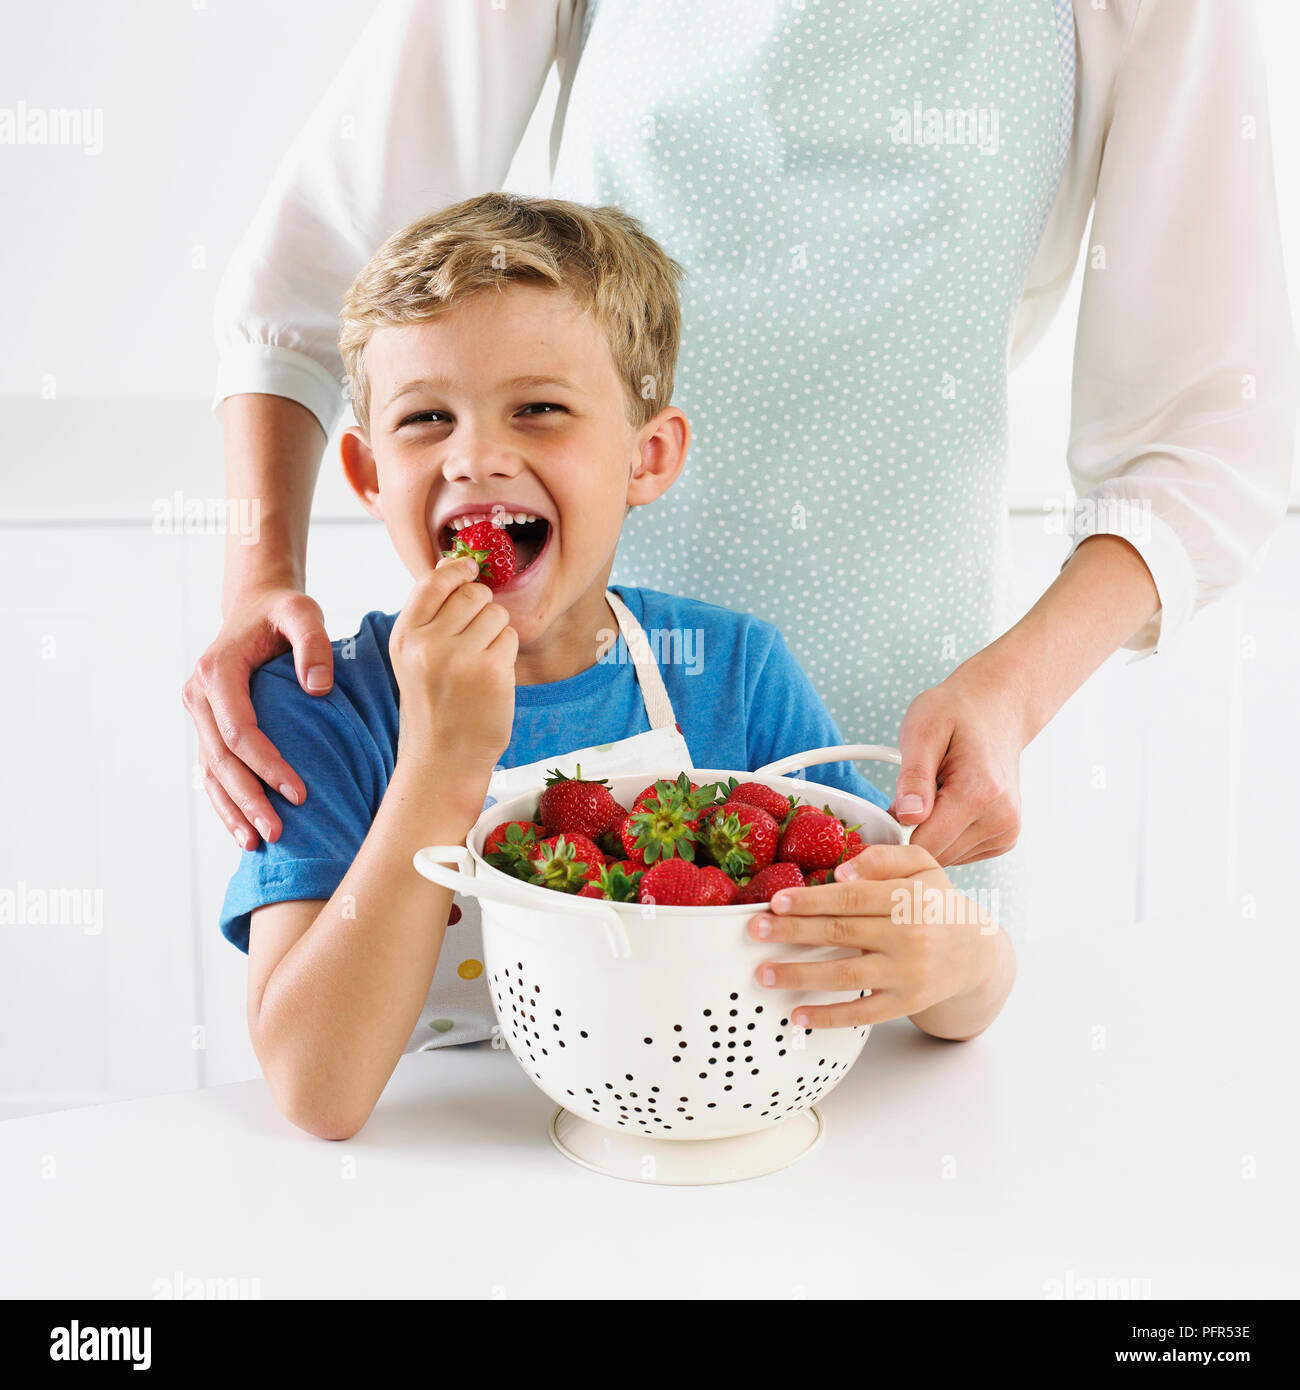 Boy with a colander of strawberries, 6 years Stock Photo